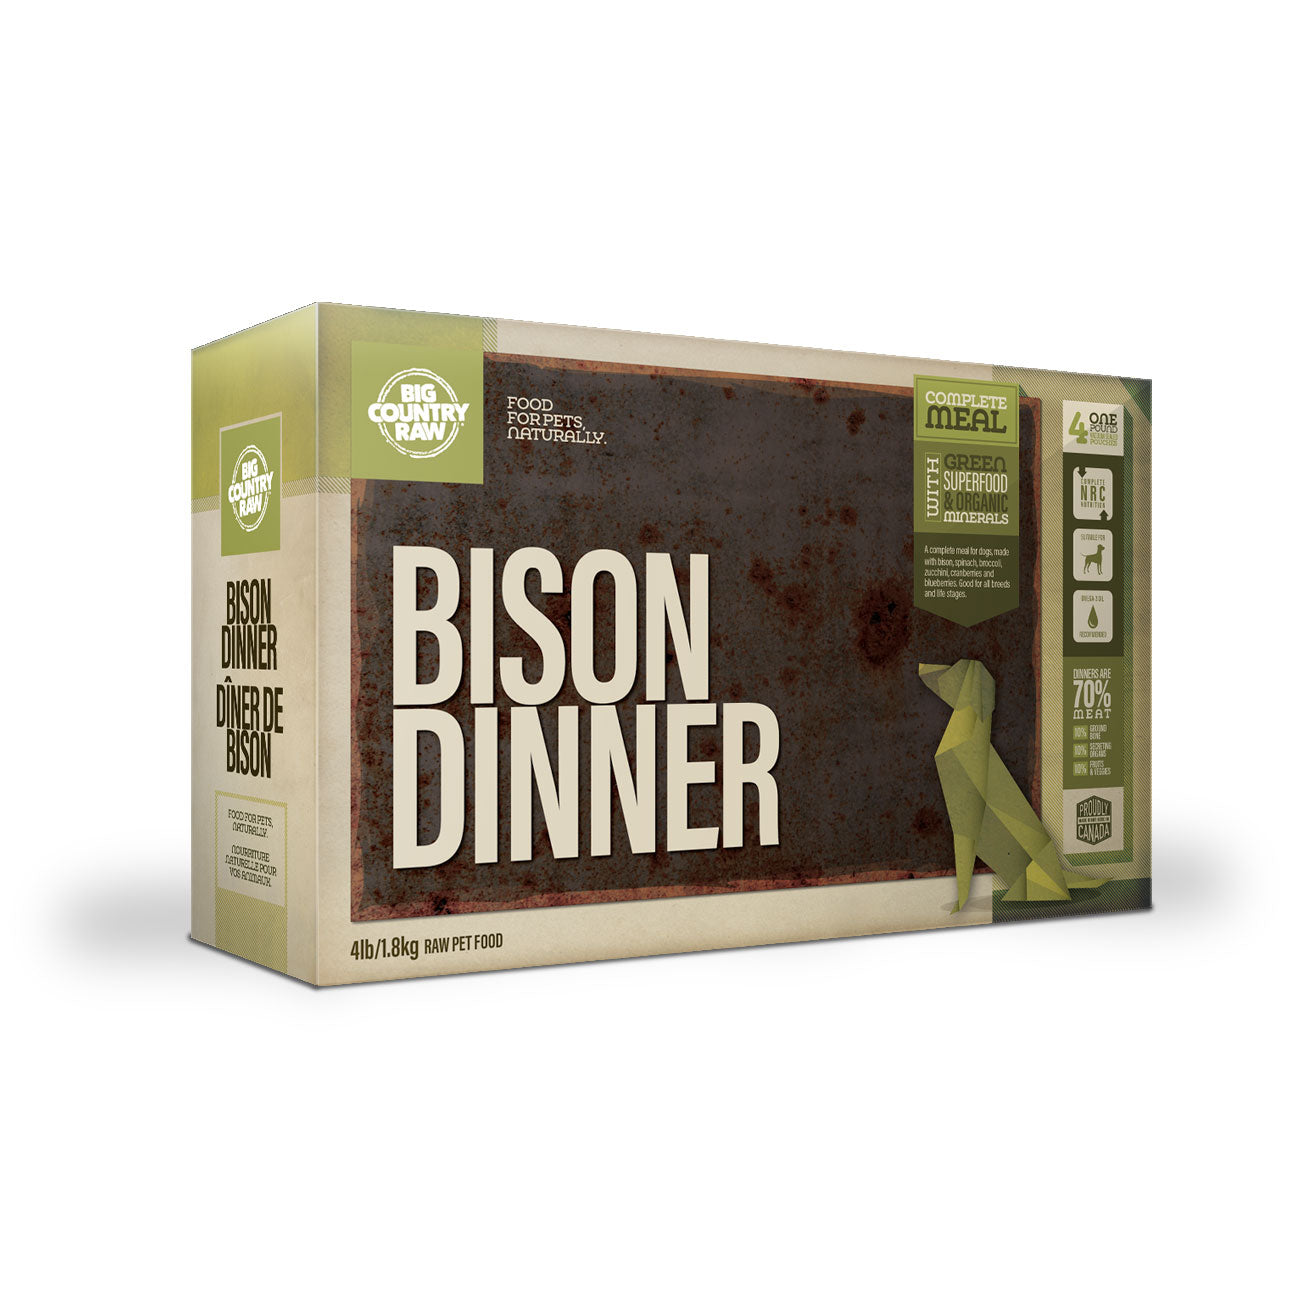 Big Country Raw Bison Dinner Carton